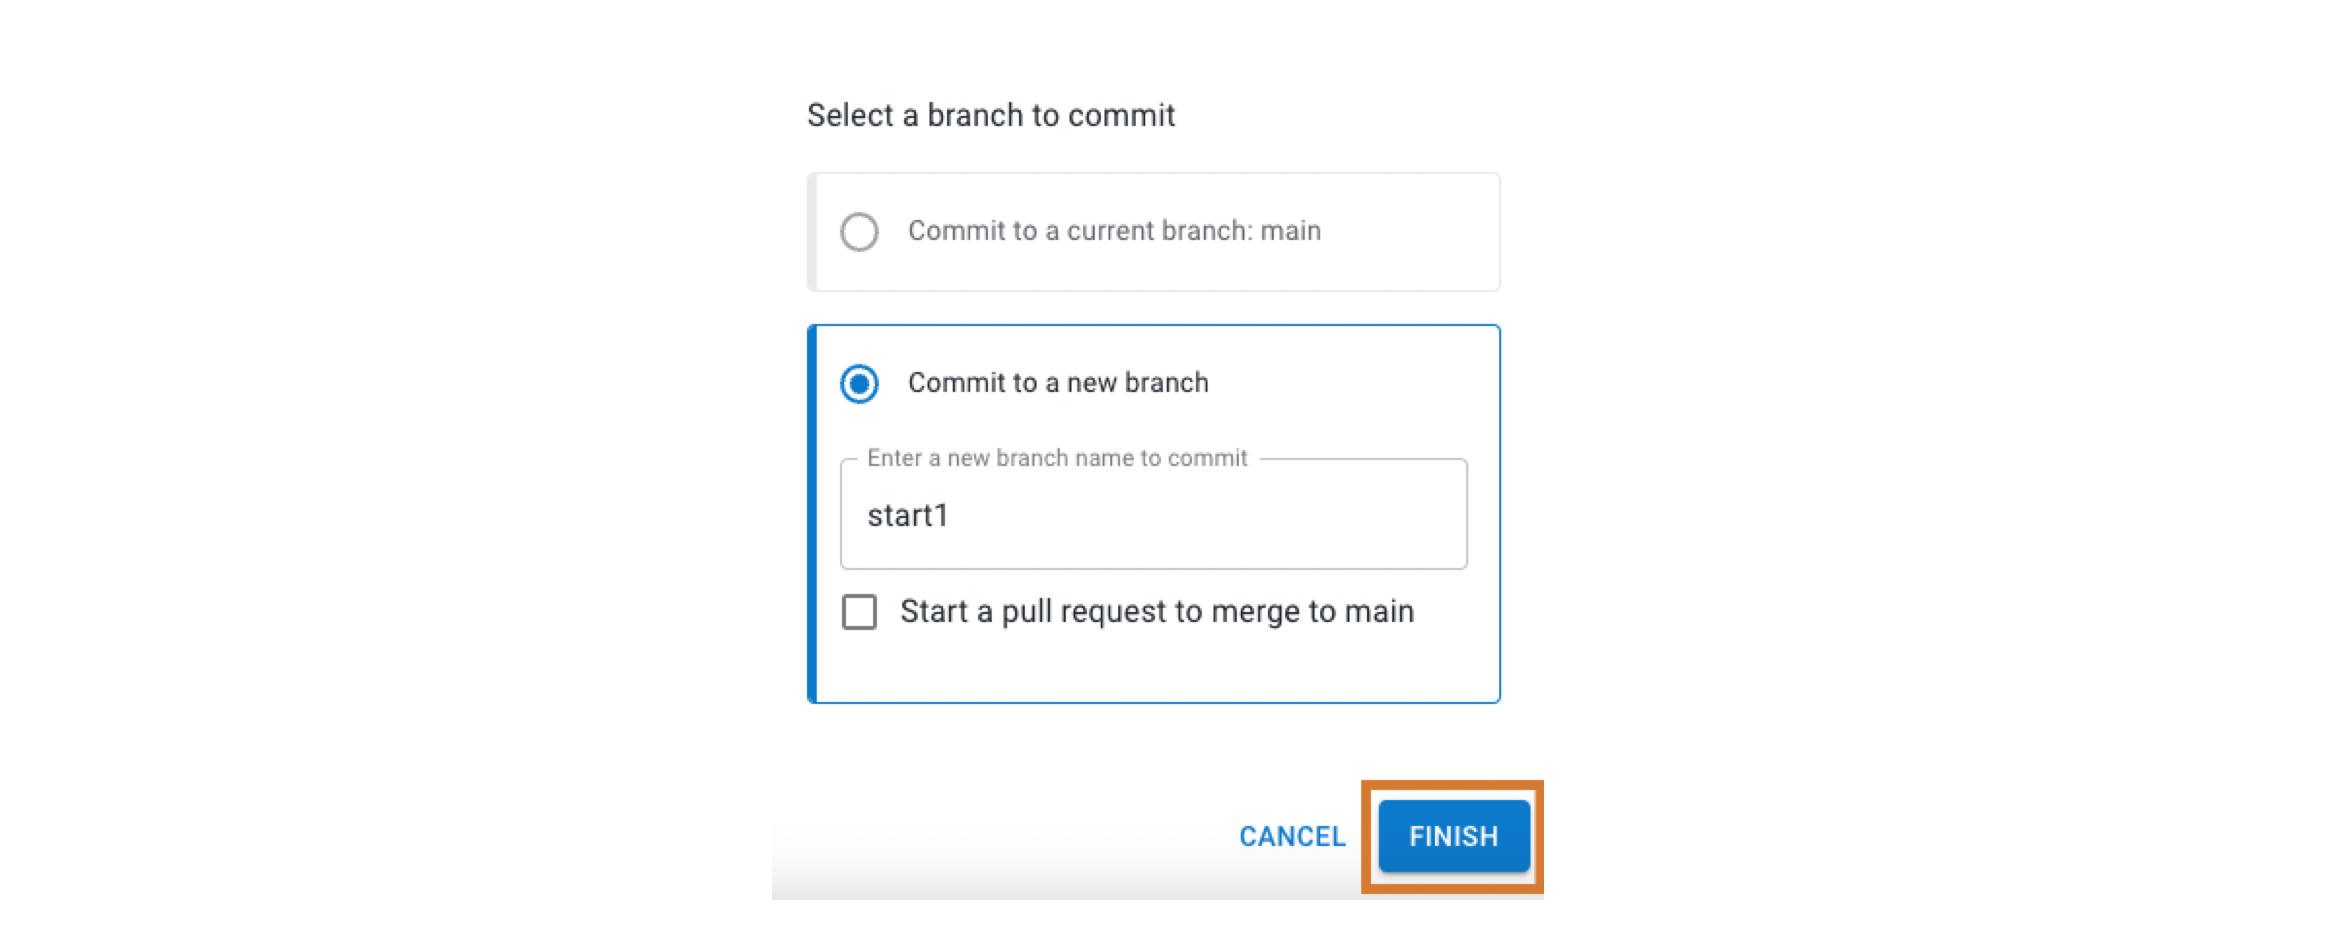 Commit to new branch